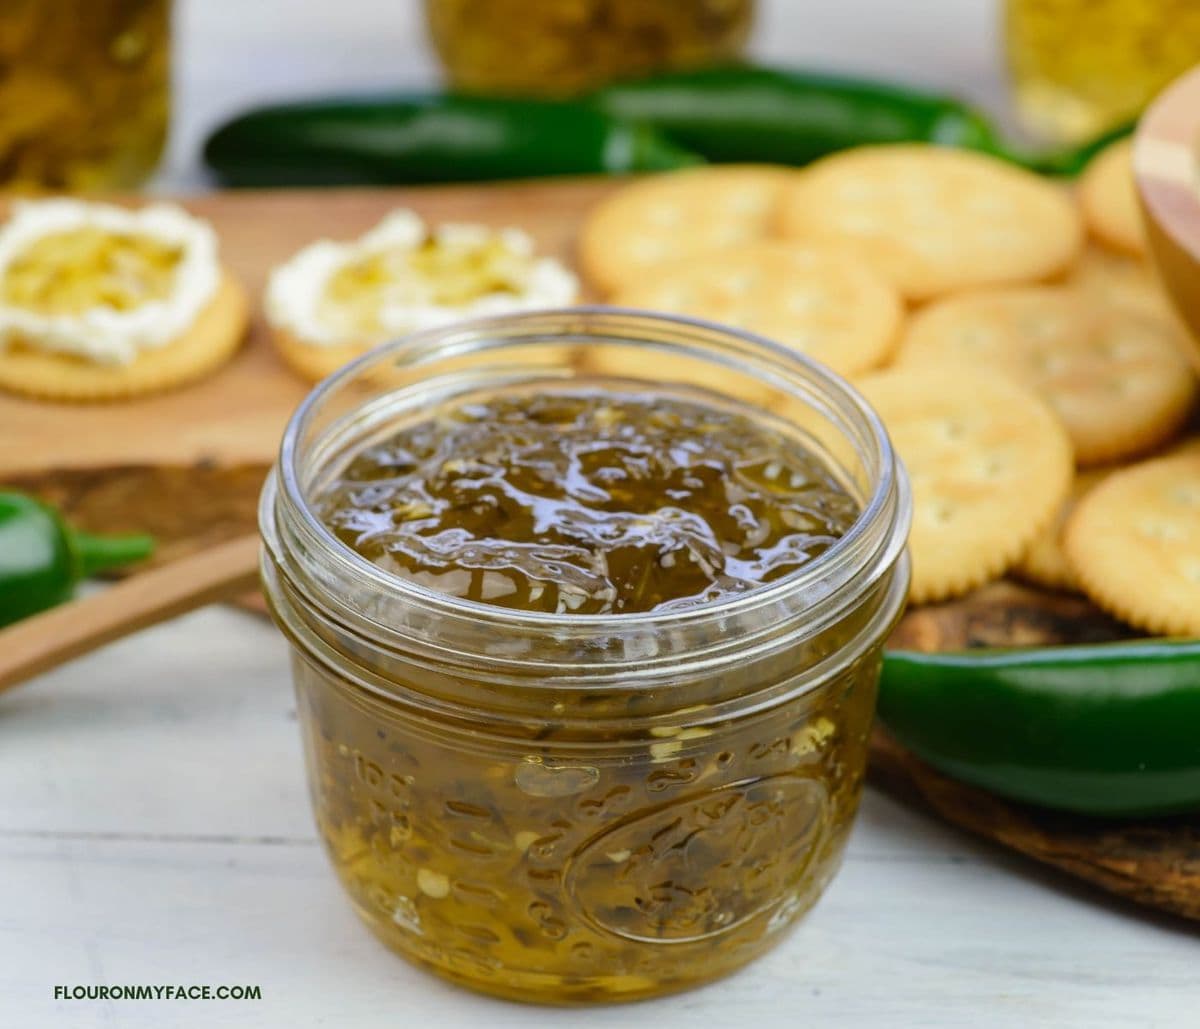 Jalapeno jelly in an opened canning jar with crackers and cream cheese in the background.